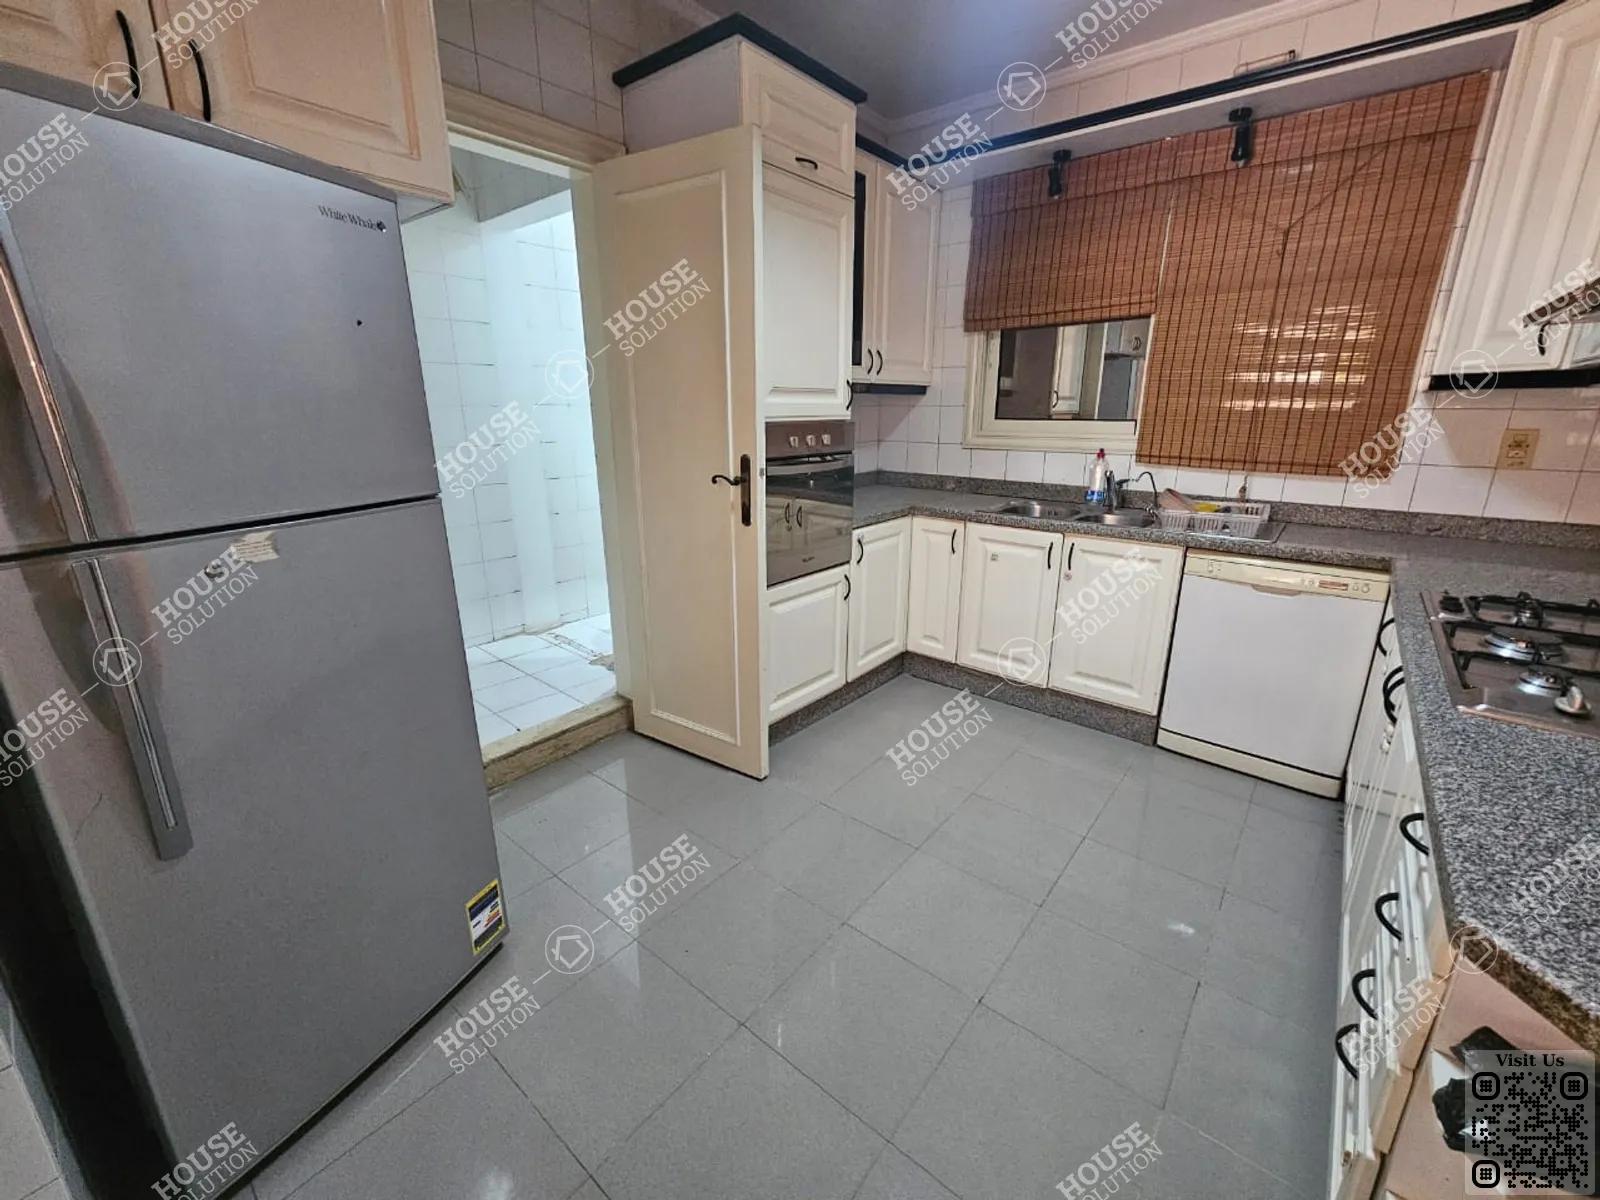 KITCHEN  @ Apartments For Rent In Maadi Maadi Sarayat Area: 185 m² consists of 3 Bedrooms 3 Bathrooms Furnished 5 stars #5821-1